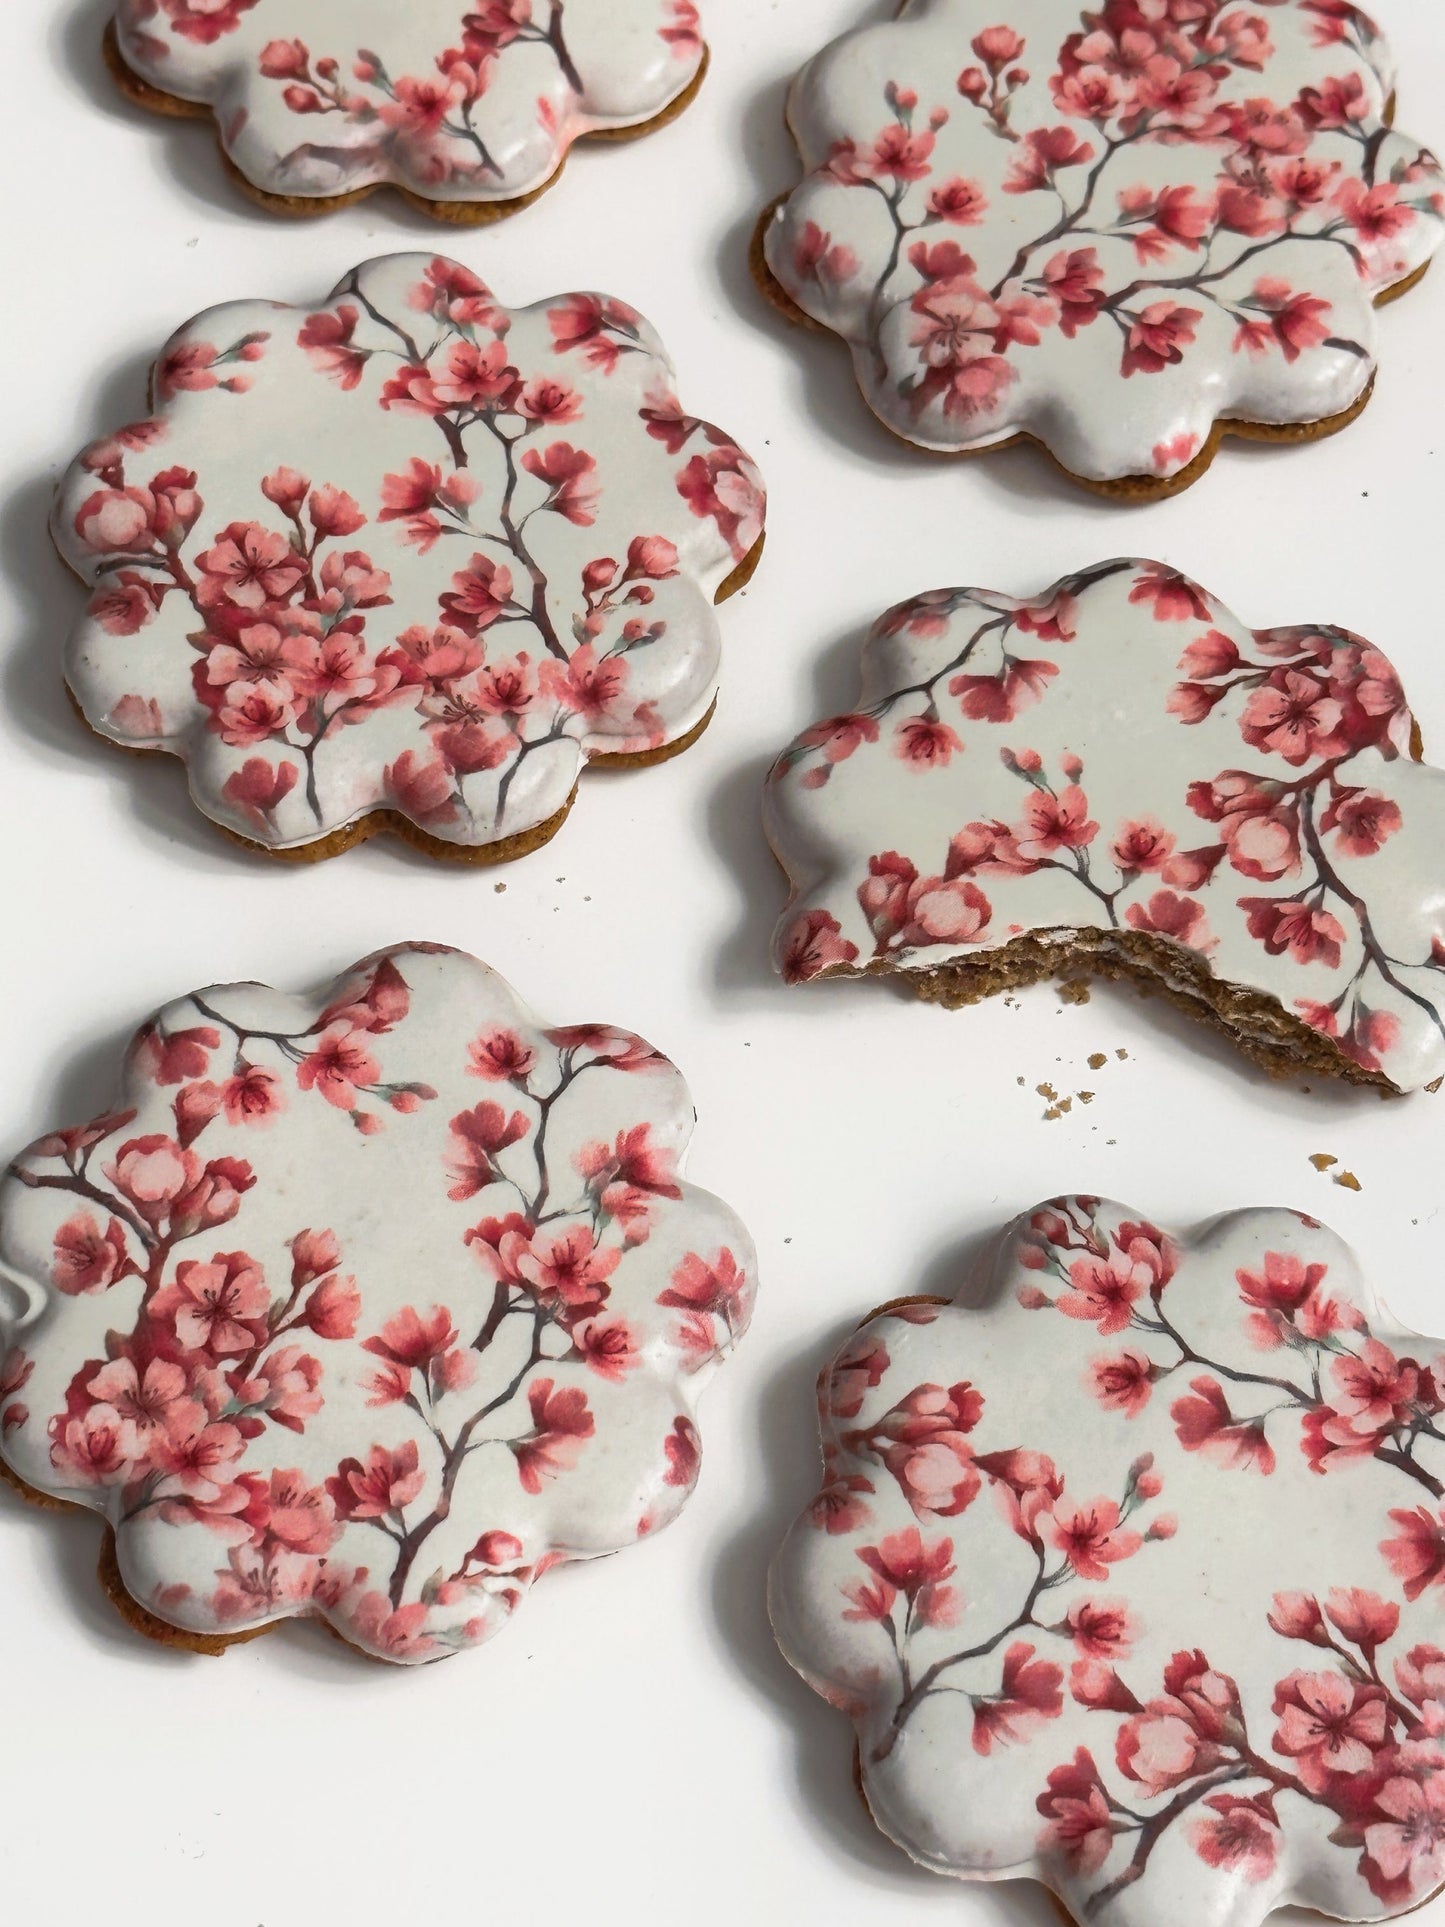 Hanami Cherry Blossom - Speculoos Biscuits with a twist